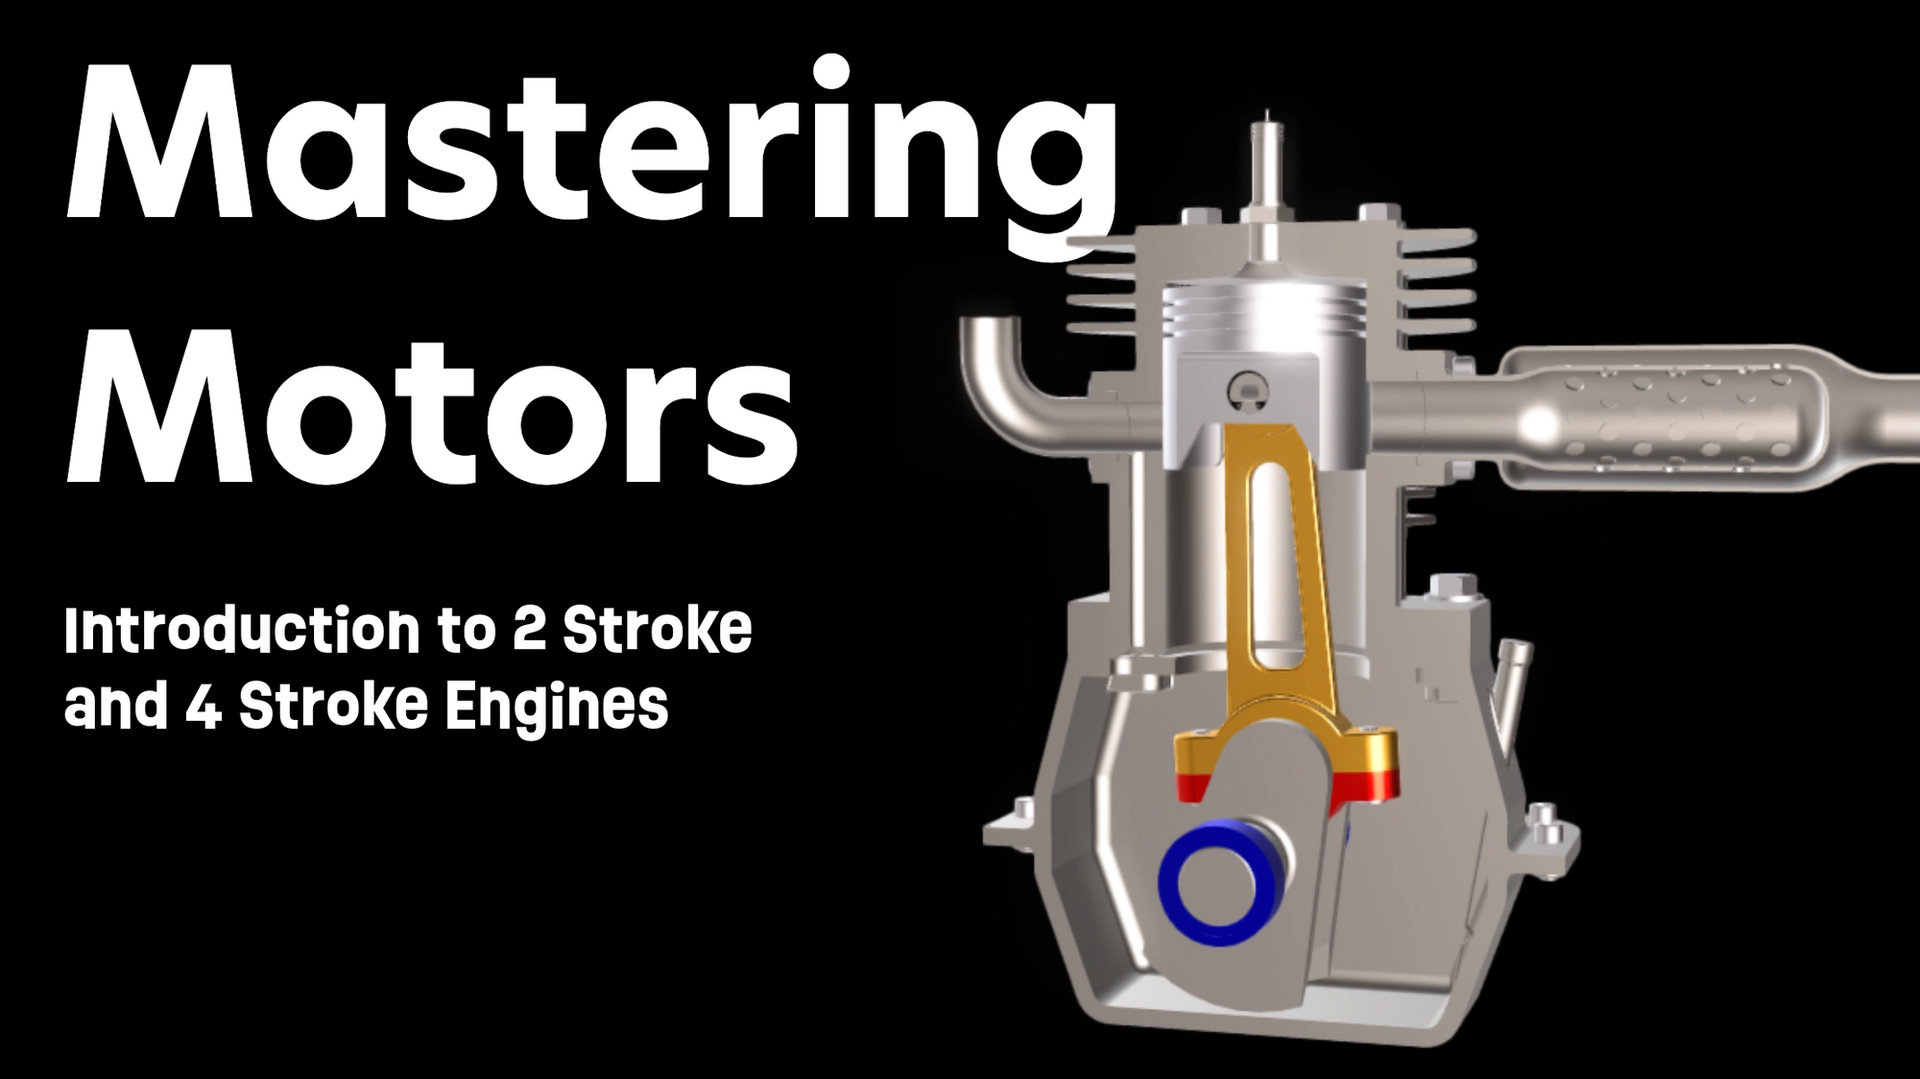 Mastering Motors: Introduction to 2 Stroke and 4 Stroke Engines